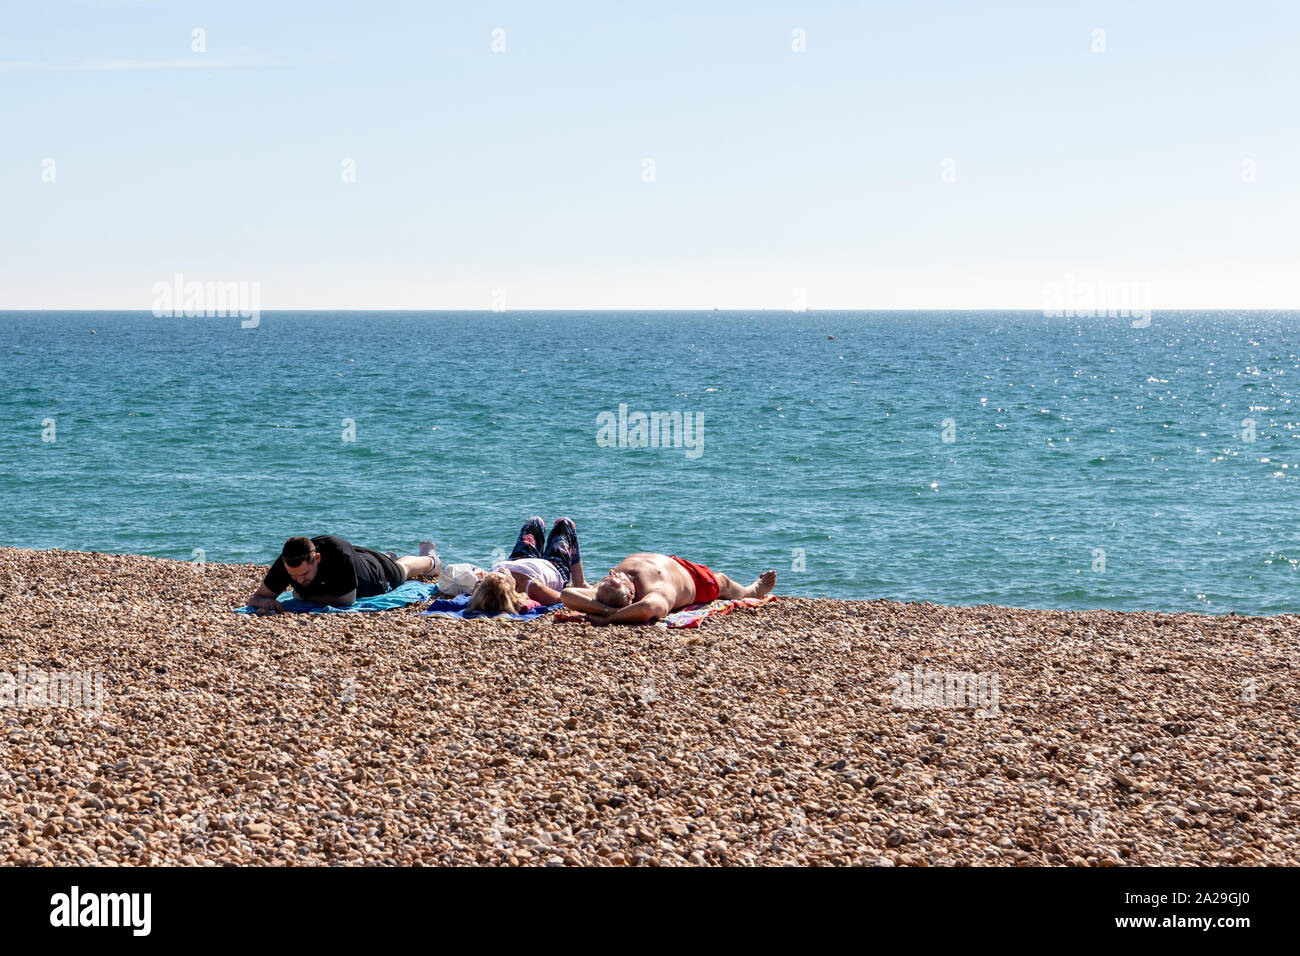 People sunbathing on a British pebble beach on a warm summers day with clear blue sky Stock Photo